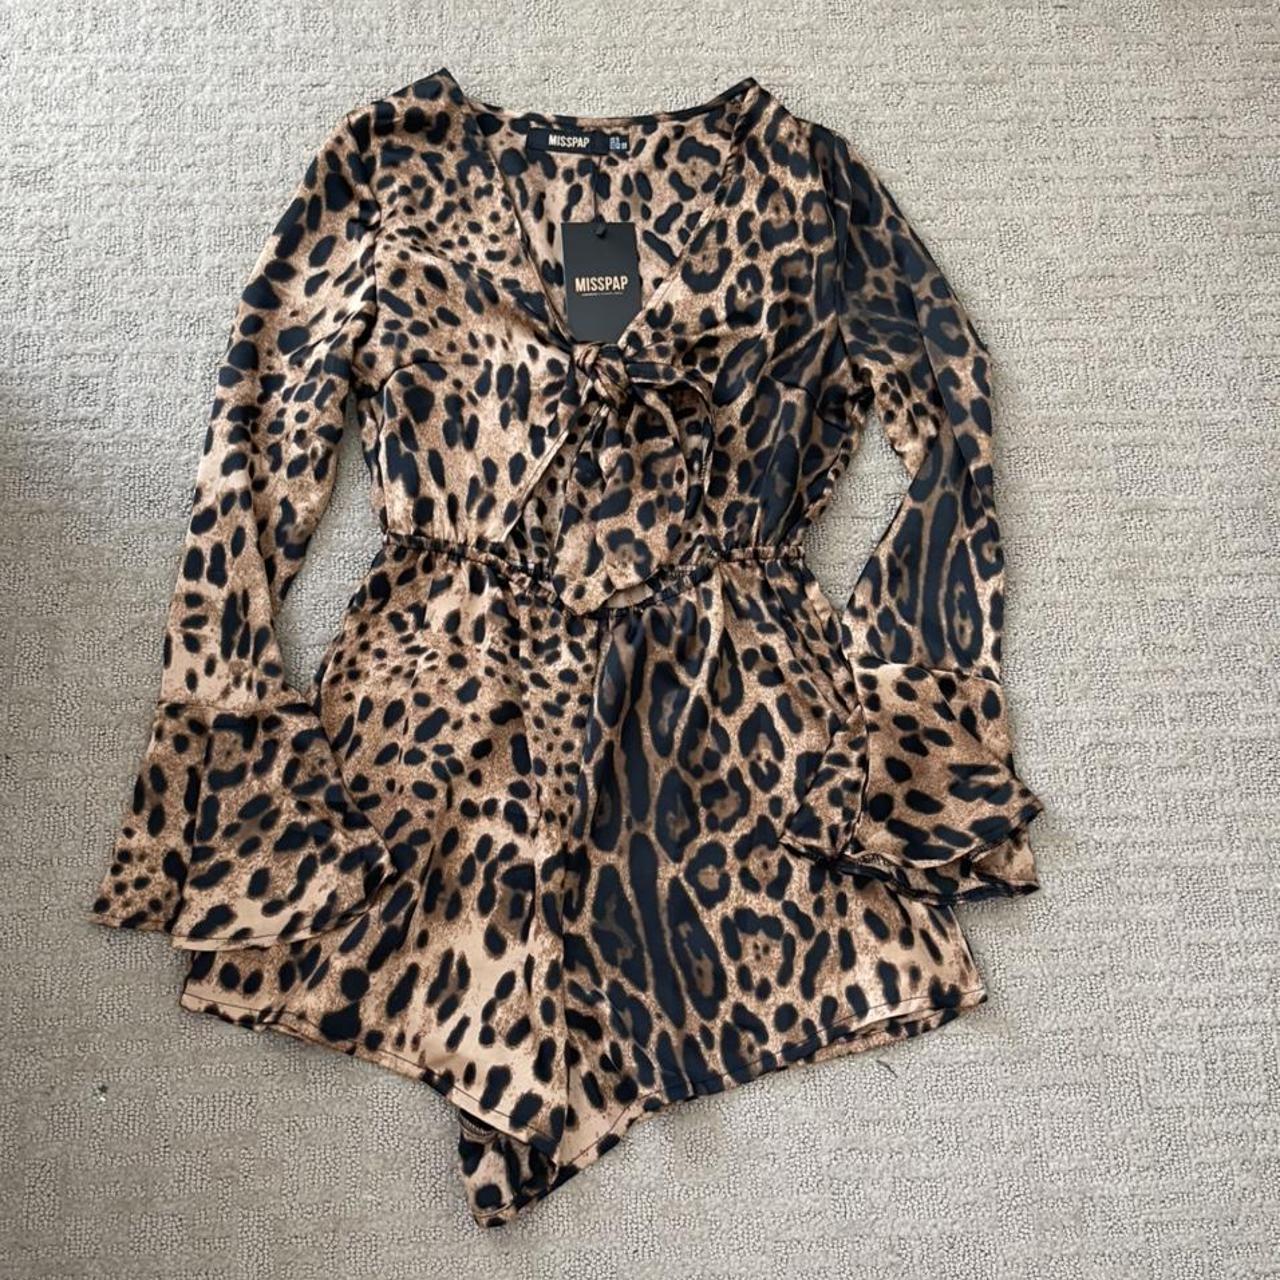 Product Image 1 - Leopard romper brand new with